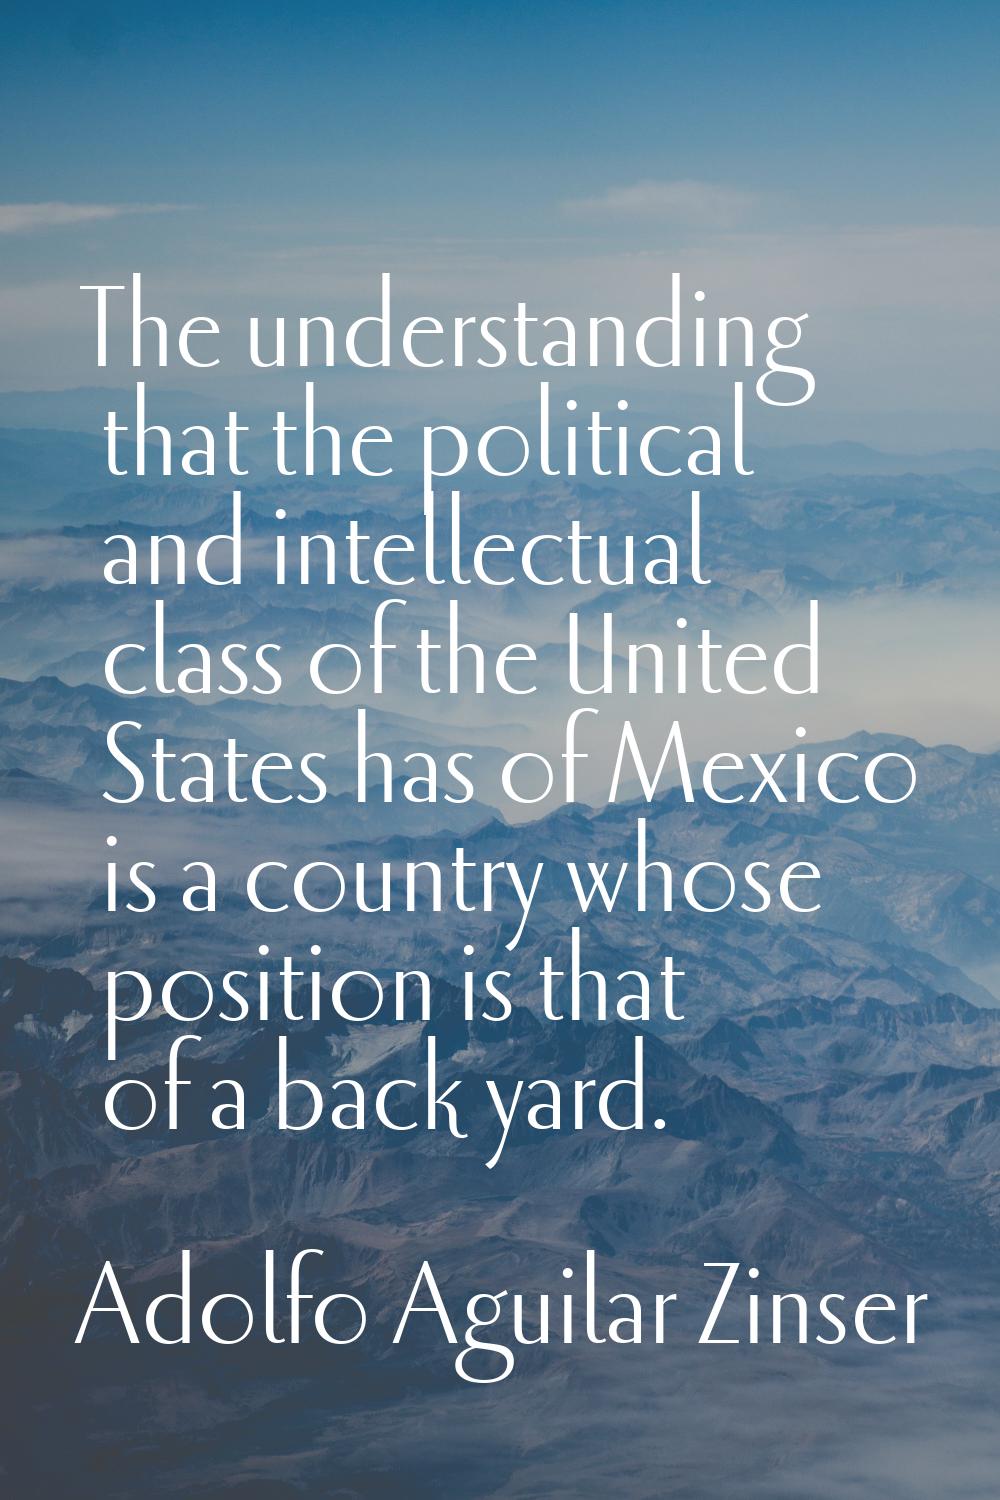 The understanding that the political and intellectual class of the United States has of Mexico is a